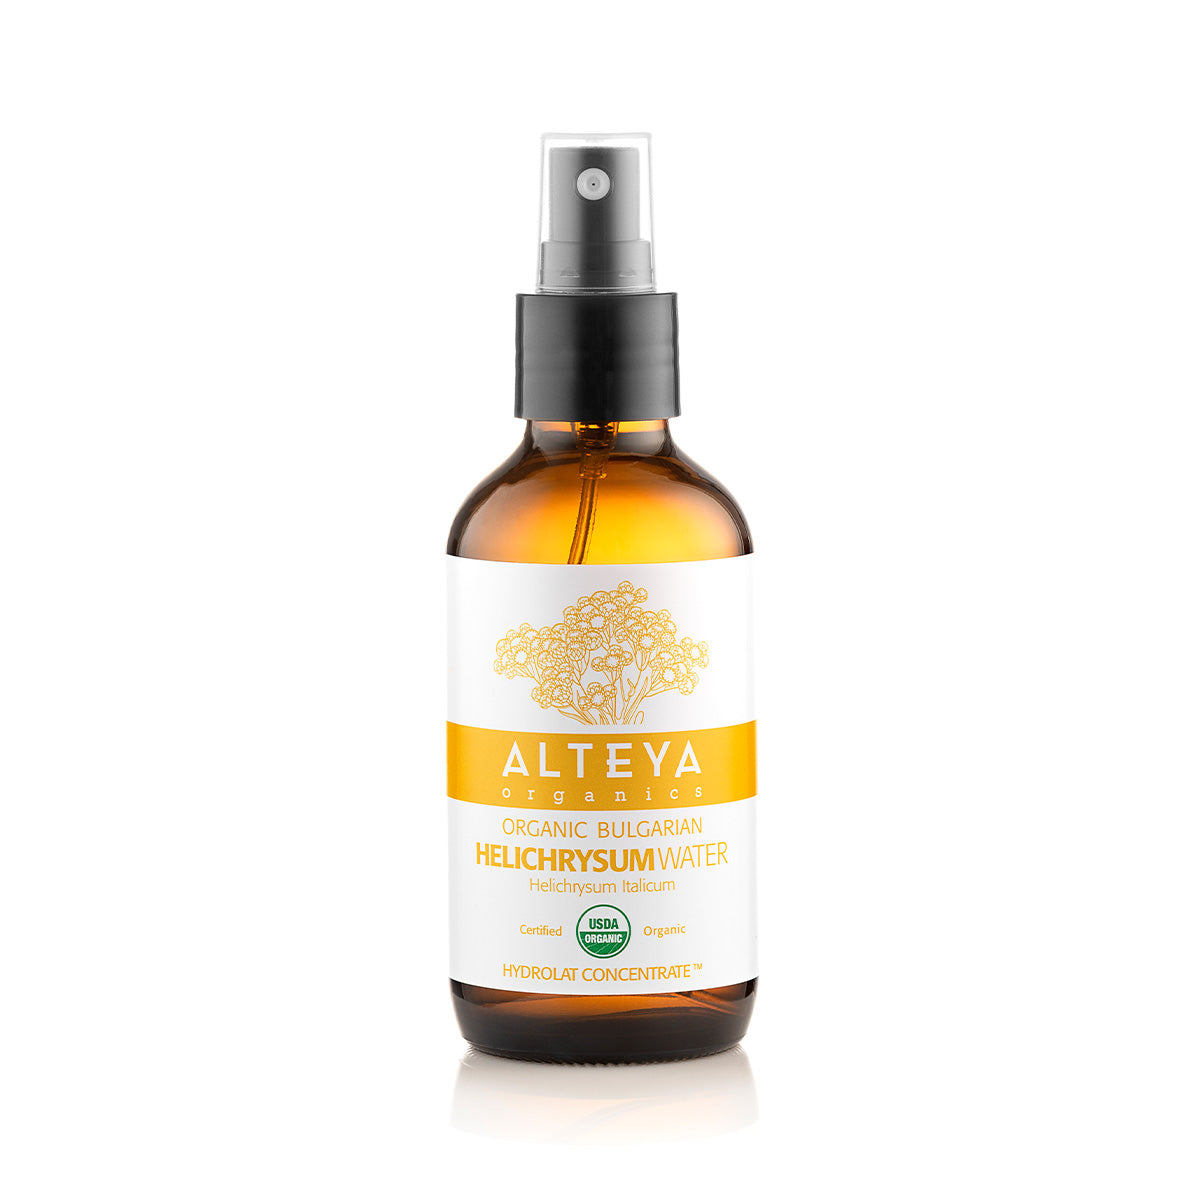 An organic bottle of Alteya Organics Bulgarian Organic Helichrysum Water – Glass Spray, infused with hydrating helichrysum water, displayed on a white background.